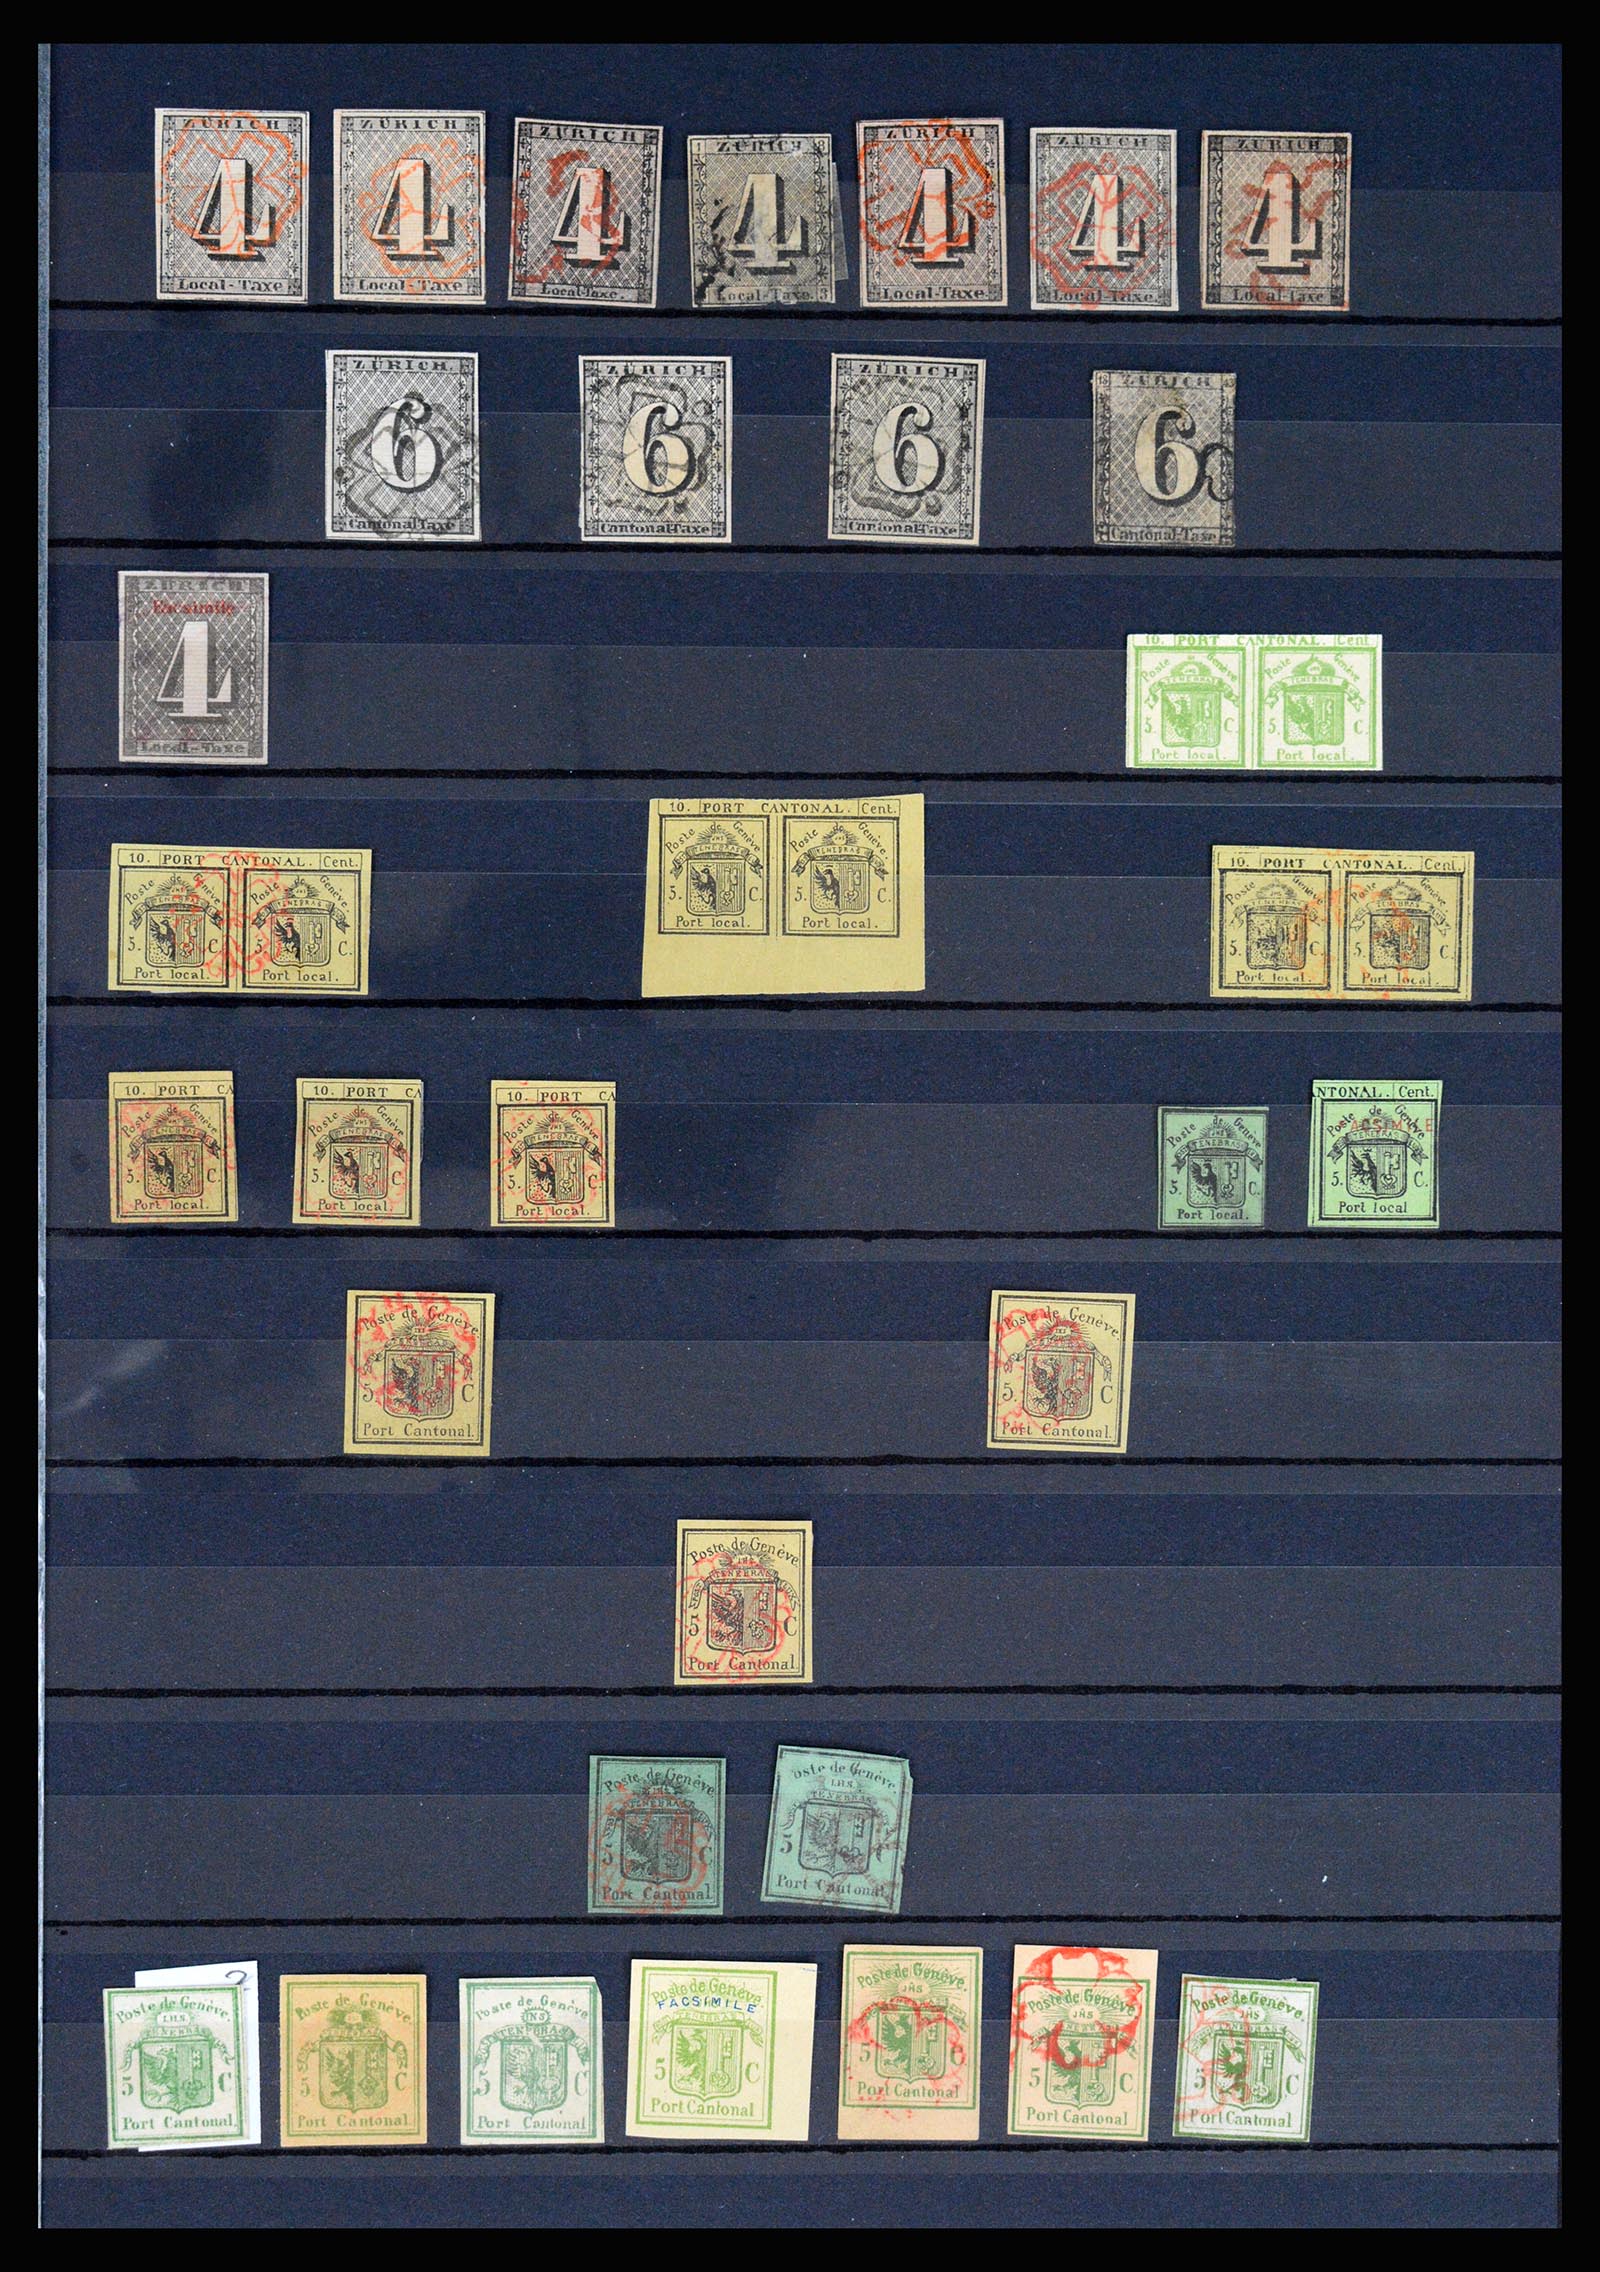 36994 001 - Stamp collection 36994 World forgeries 1843-1940.